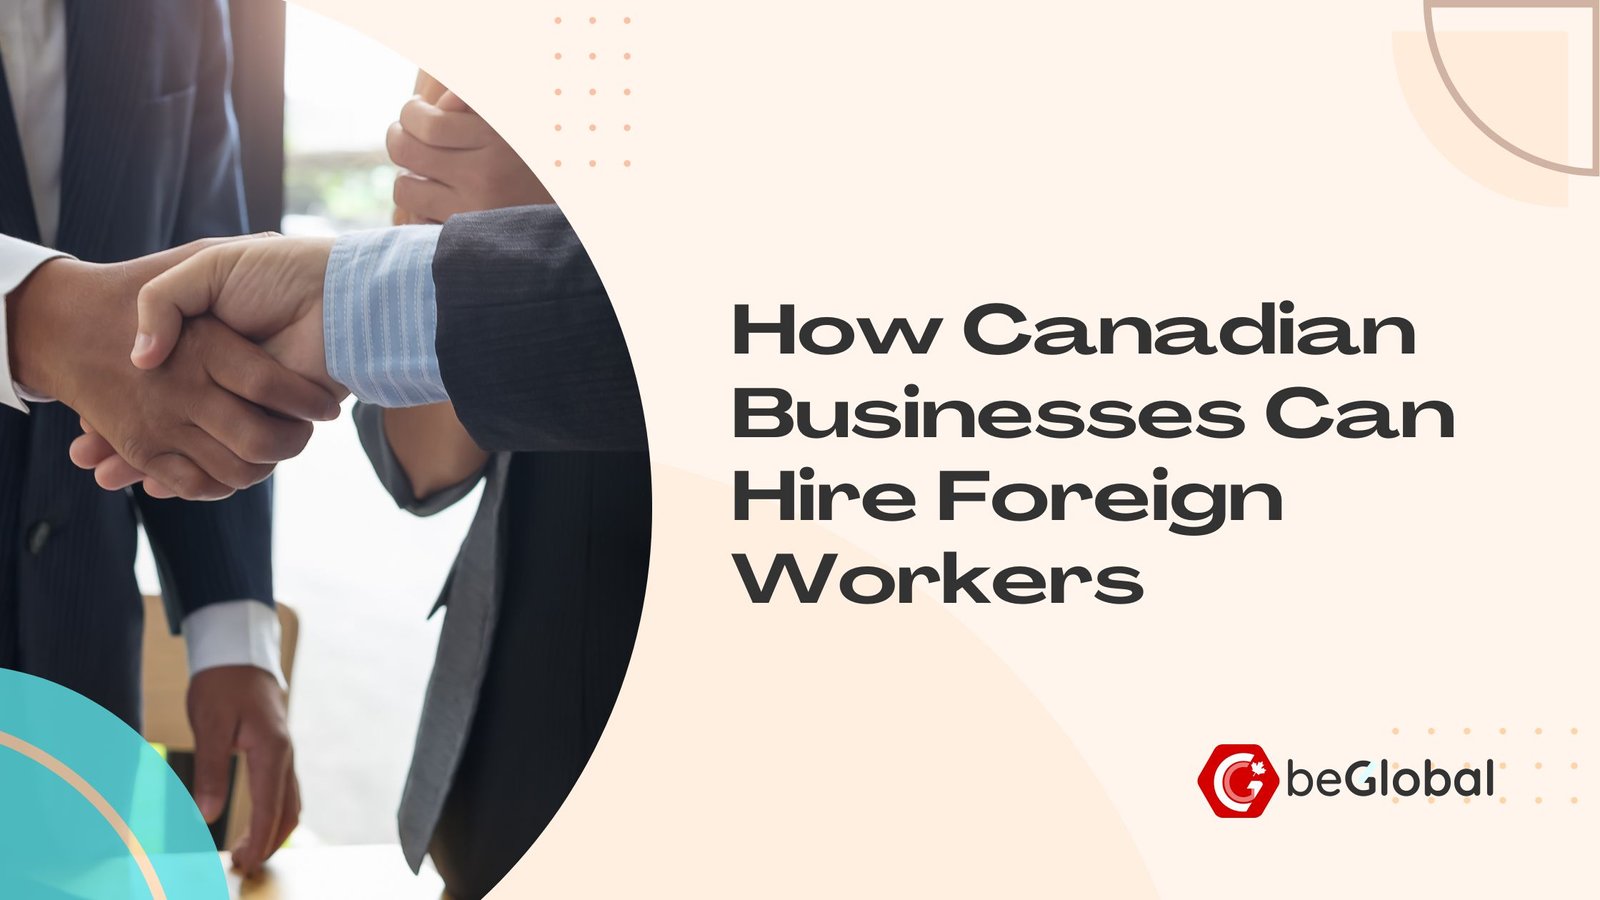 How Canadian Businesses Can Hire Foreign Workers